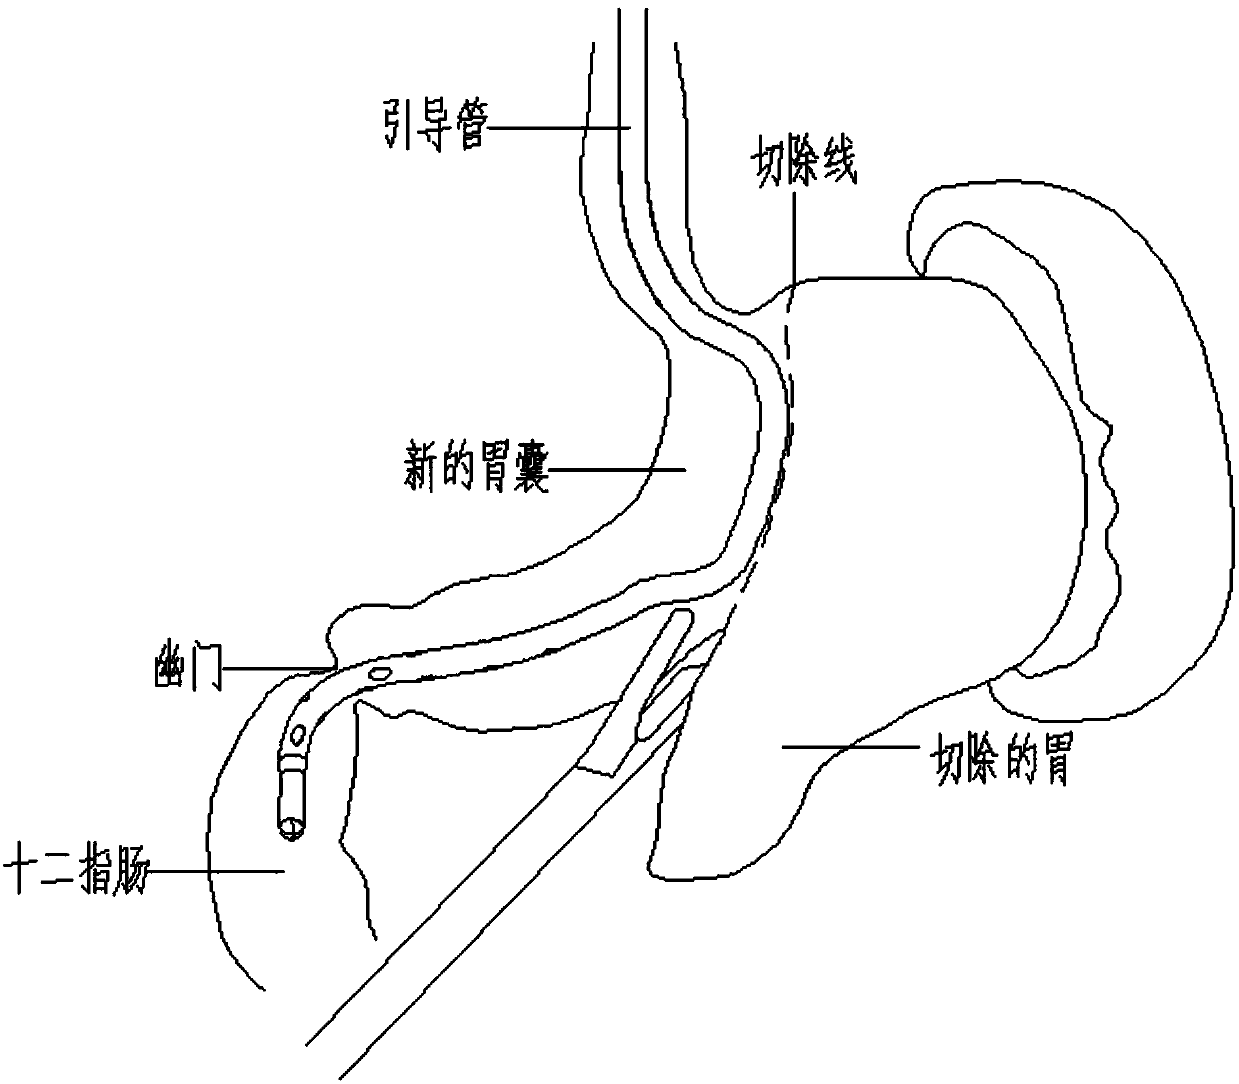 Guide tube special for laparoscopic sleeve gastrectomy